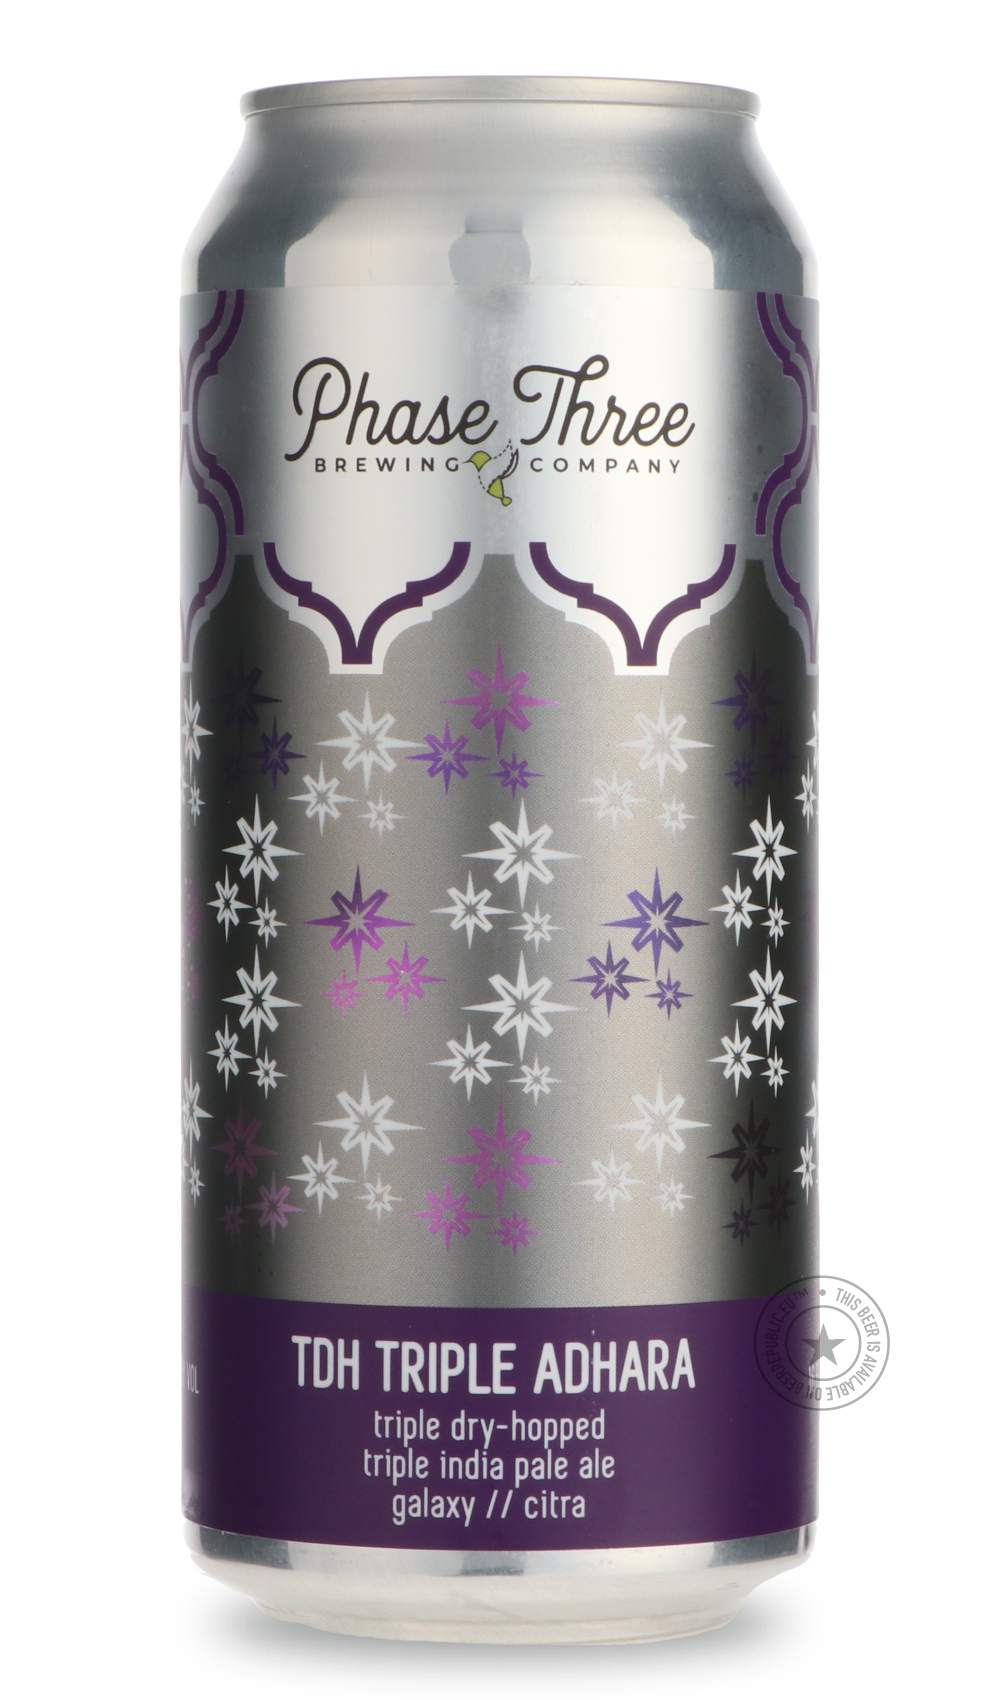 -Phase Three- TDH Triple Adhara-IPA- Only @ Beer Republic - The best online beer store for American & Canadian craft beer - Buy beer online from the USA and Canada - Bier online kopen - Amerikaans bier kopen - Craft beer store - Craft beer kopen - Amerikanisch bier kaufen - Bier online kaufen - Acheter biere online - IPA - Stout - Porter - New England IPA - Hazy IPA - Imperial Stout - Barrel Aged - Barrel Aged Imperial Stout - Brown - Dark beer - Blond - Blonde - Pilsner - Lager - Wheat - Weizen - Amber - B